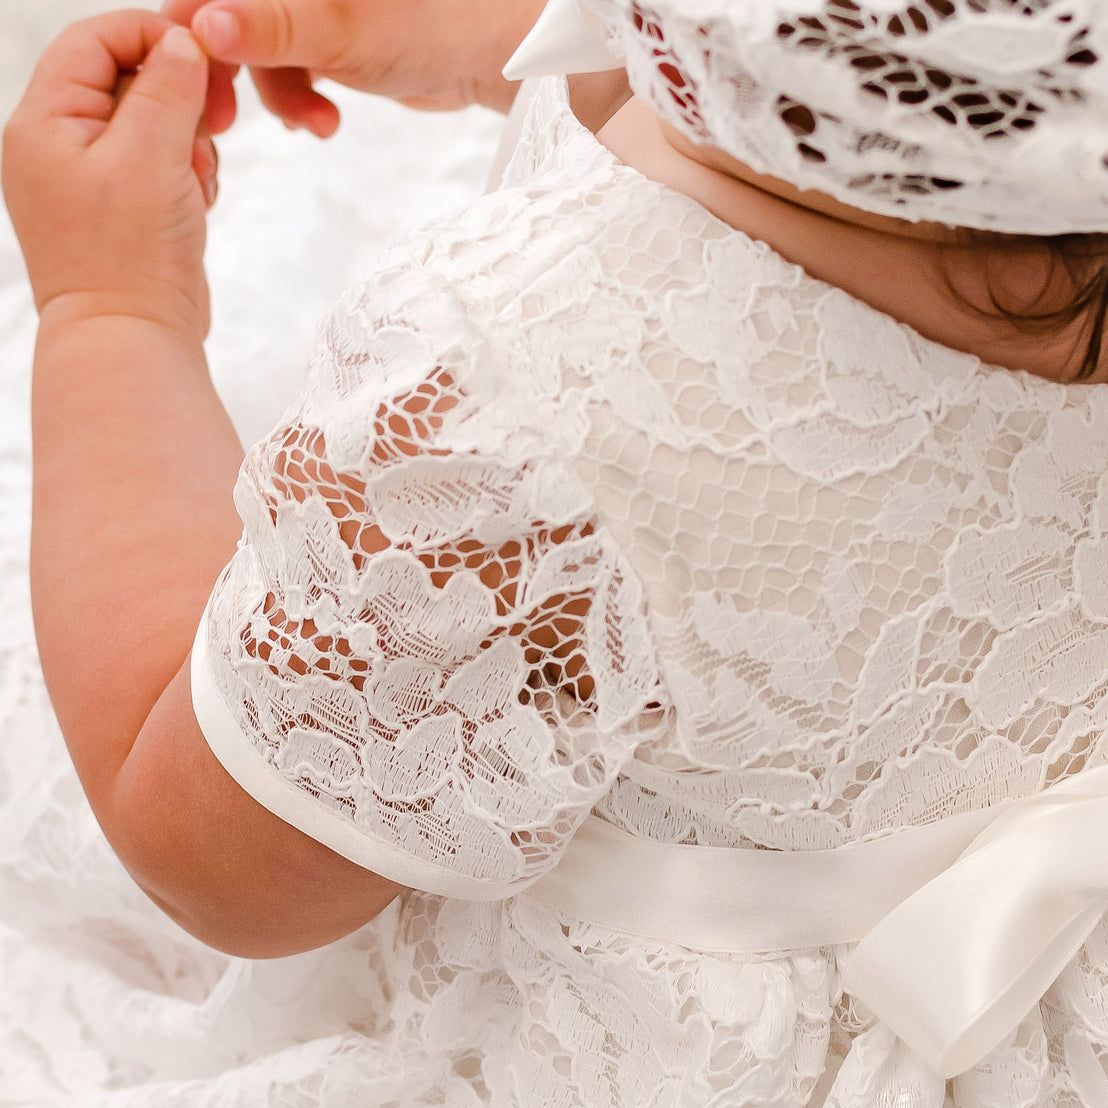 Close-up of a baby wearing a Rose Christening Gown & Bonnet, with a focus on the delicate fabric and a small hand reaching out gently.